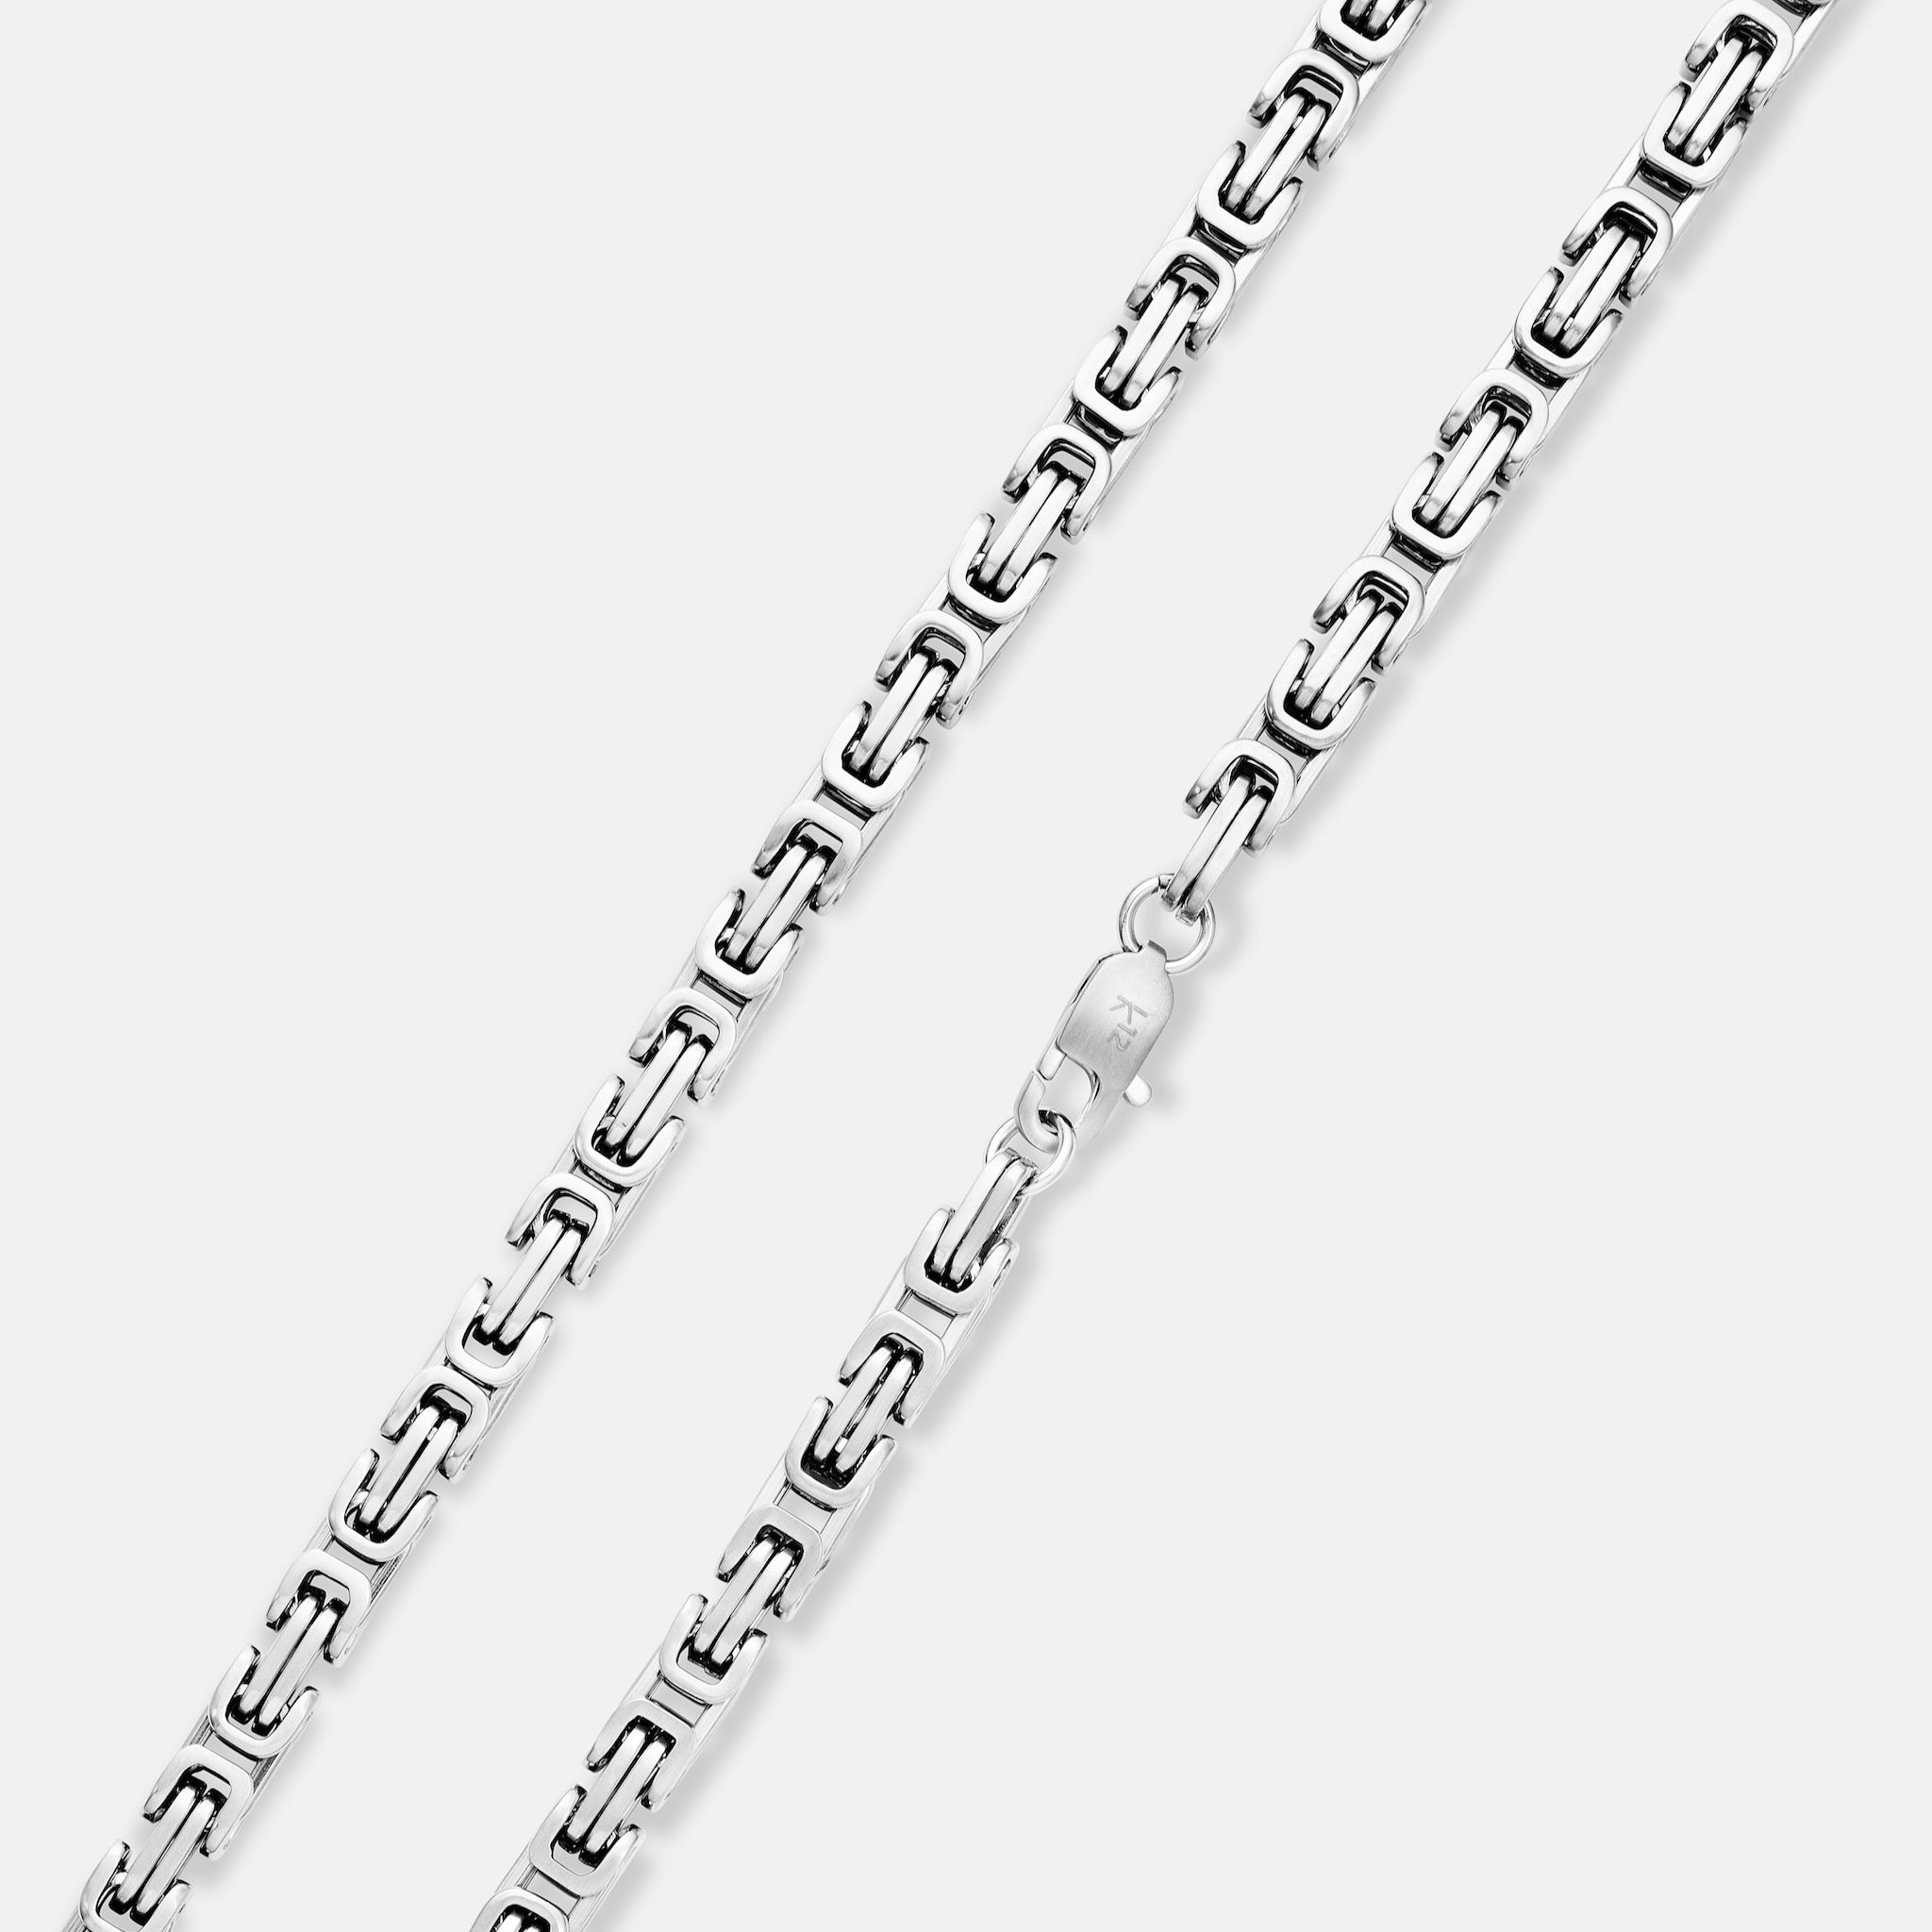 K12 - SILVER KING CHAIN - 6.2MM